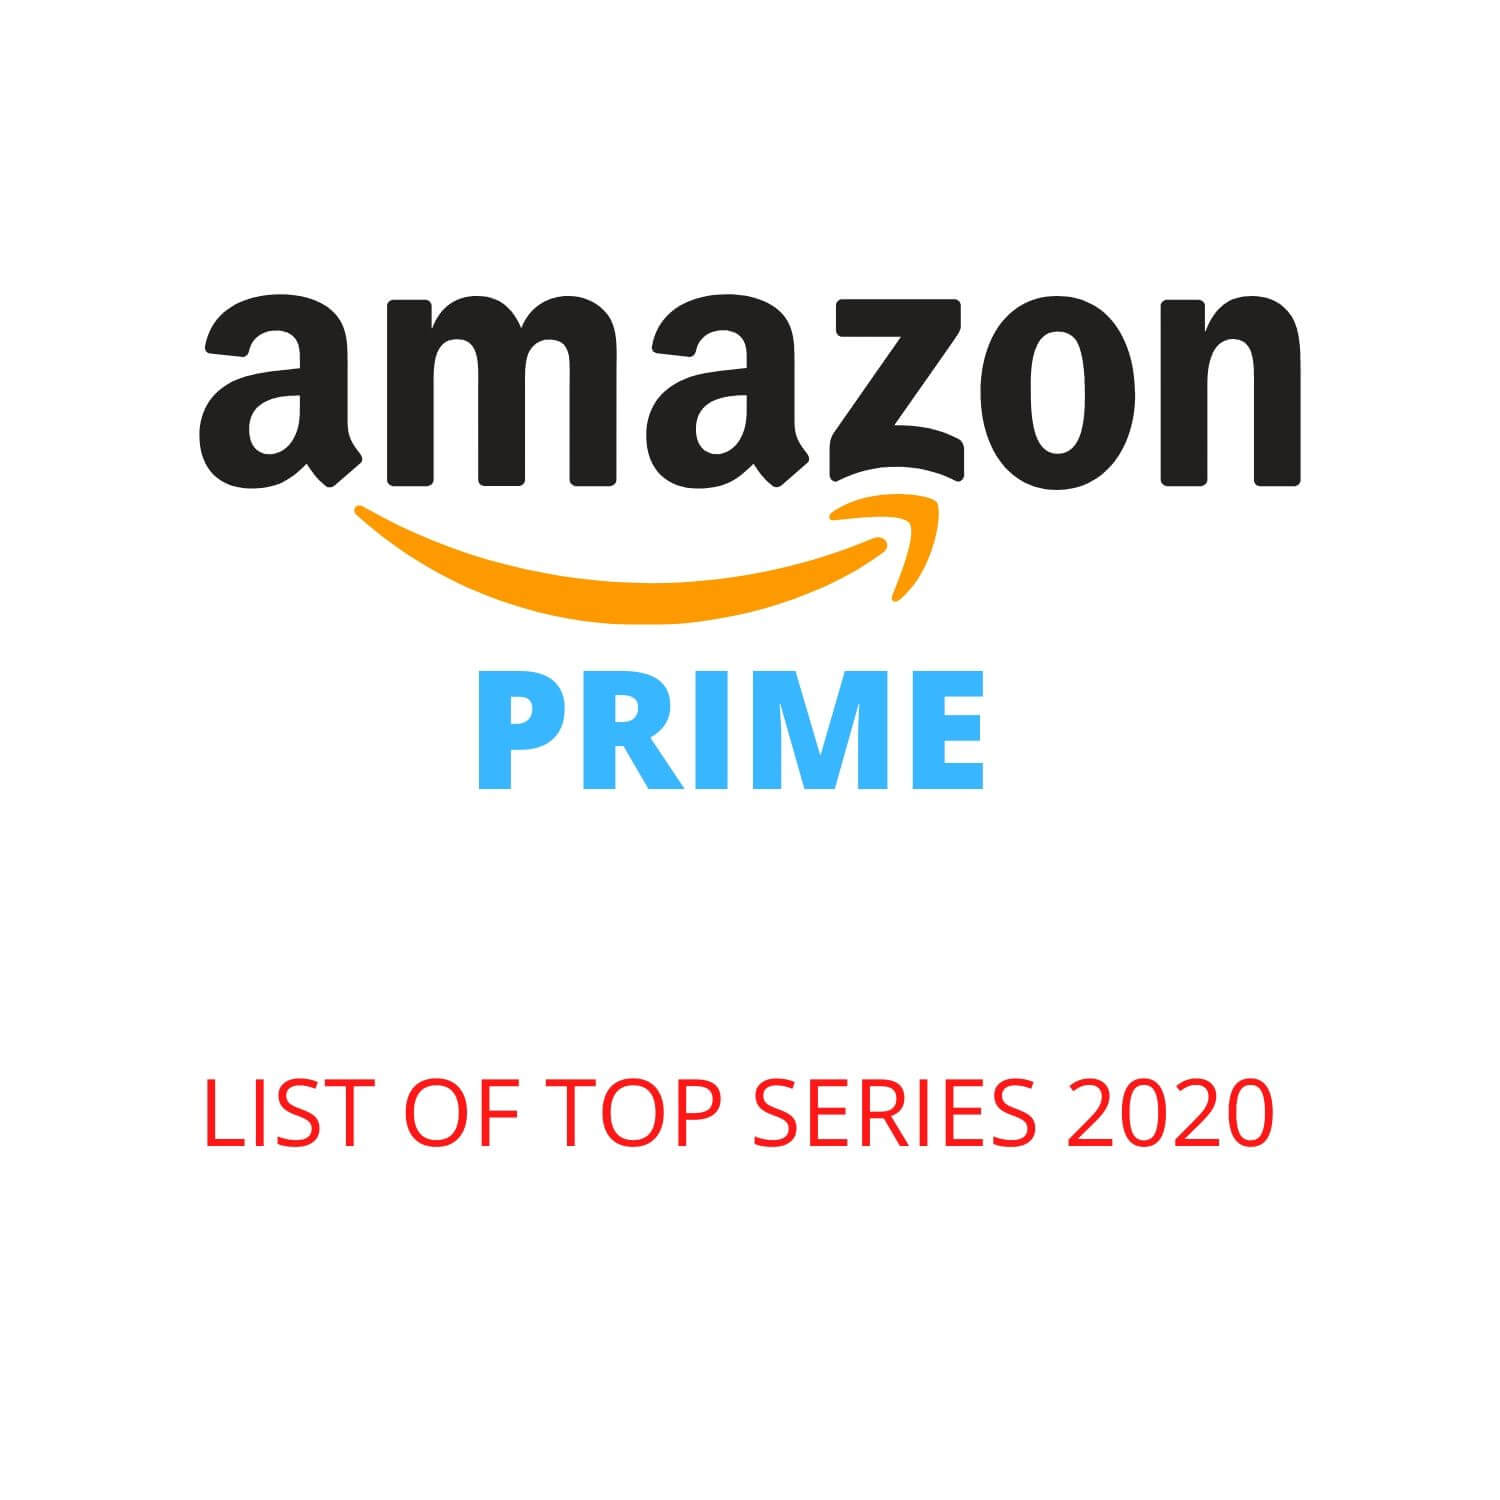 WHAT TO WATCH ON PRIME